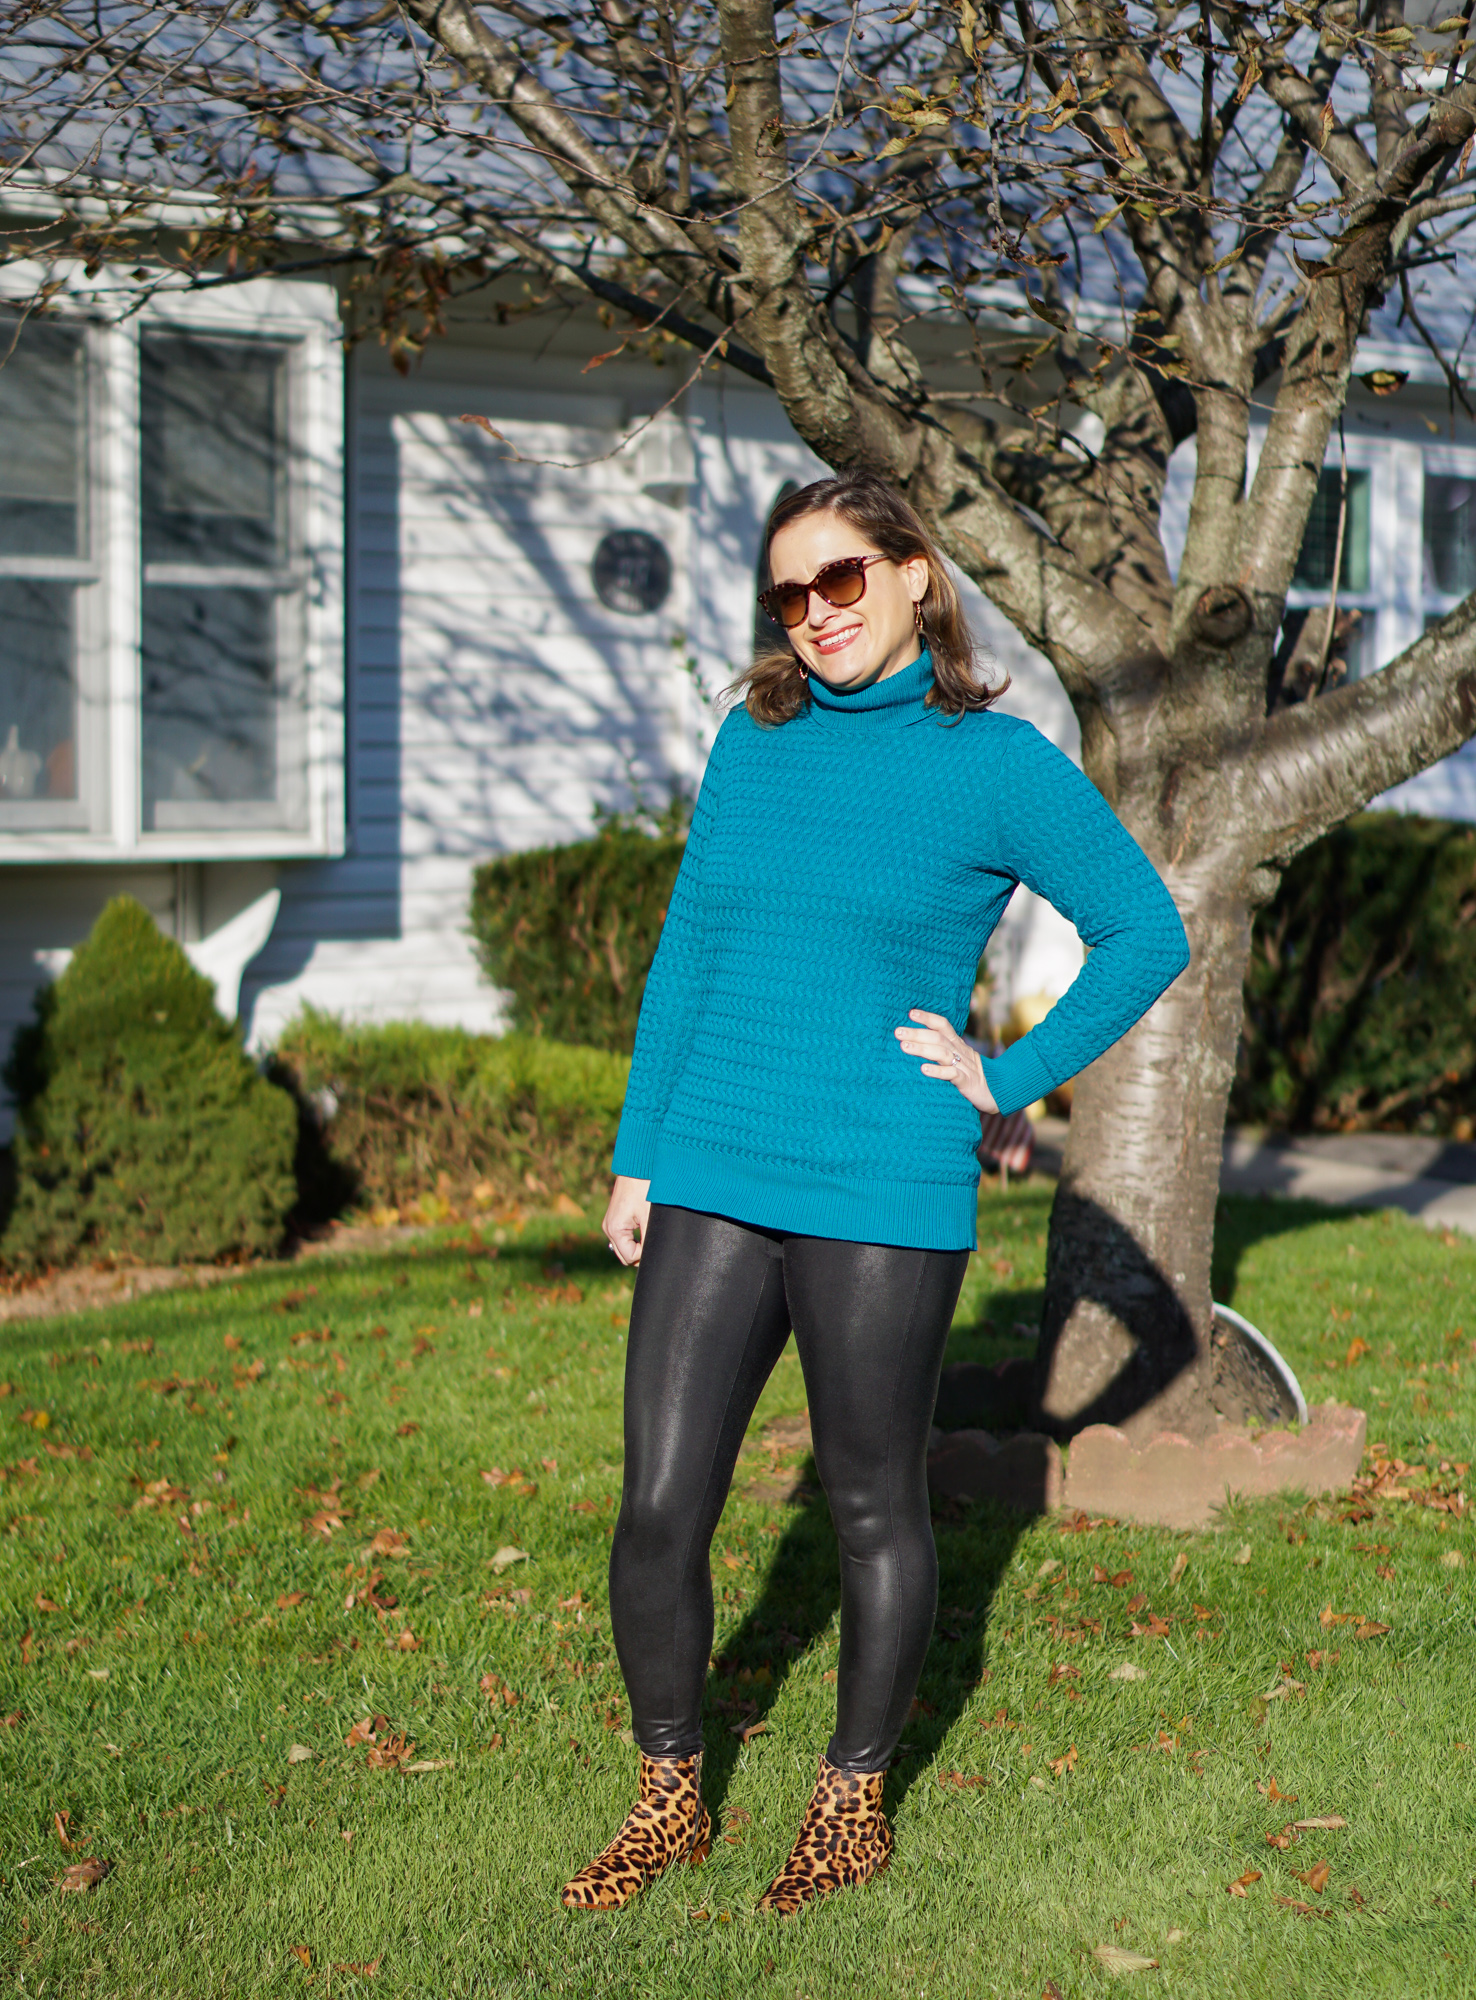 How to style a tunic sweater